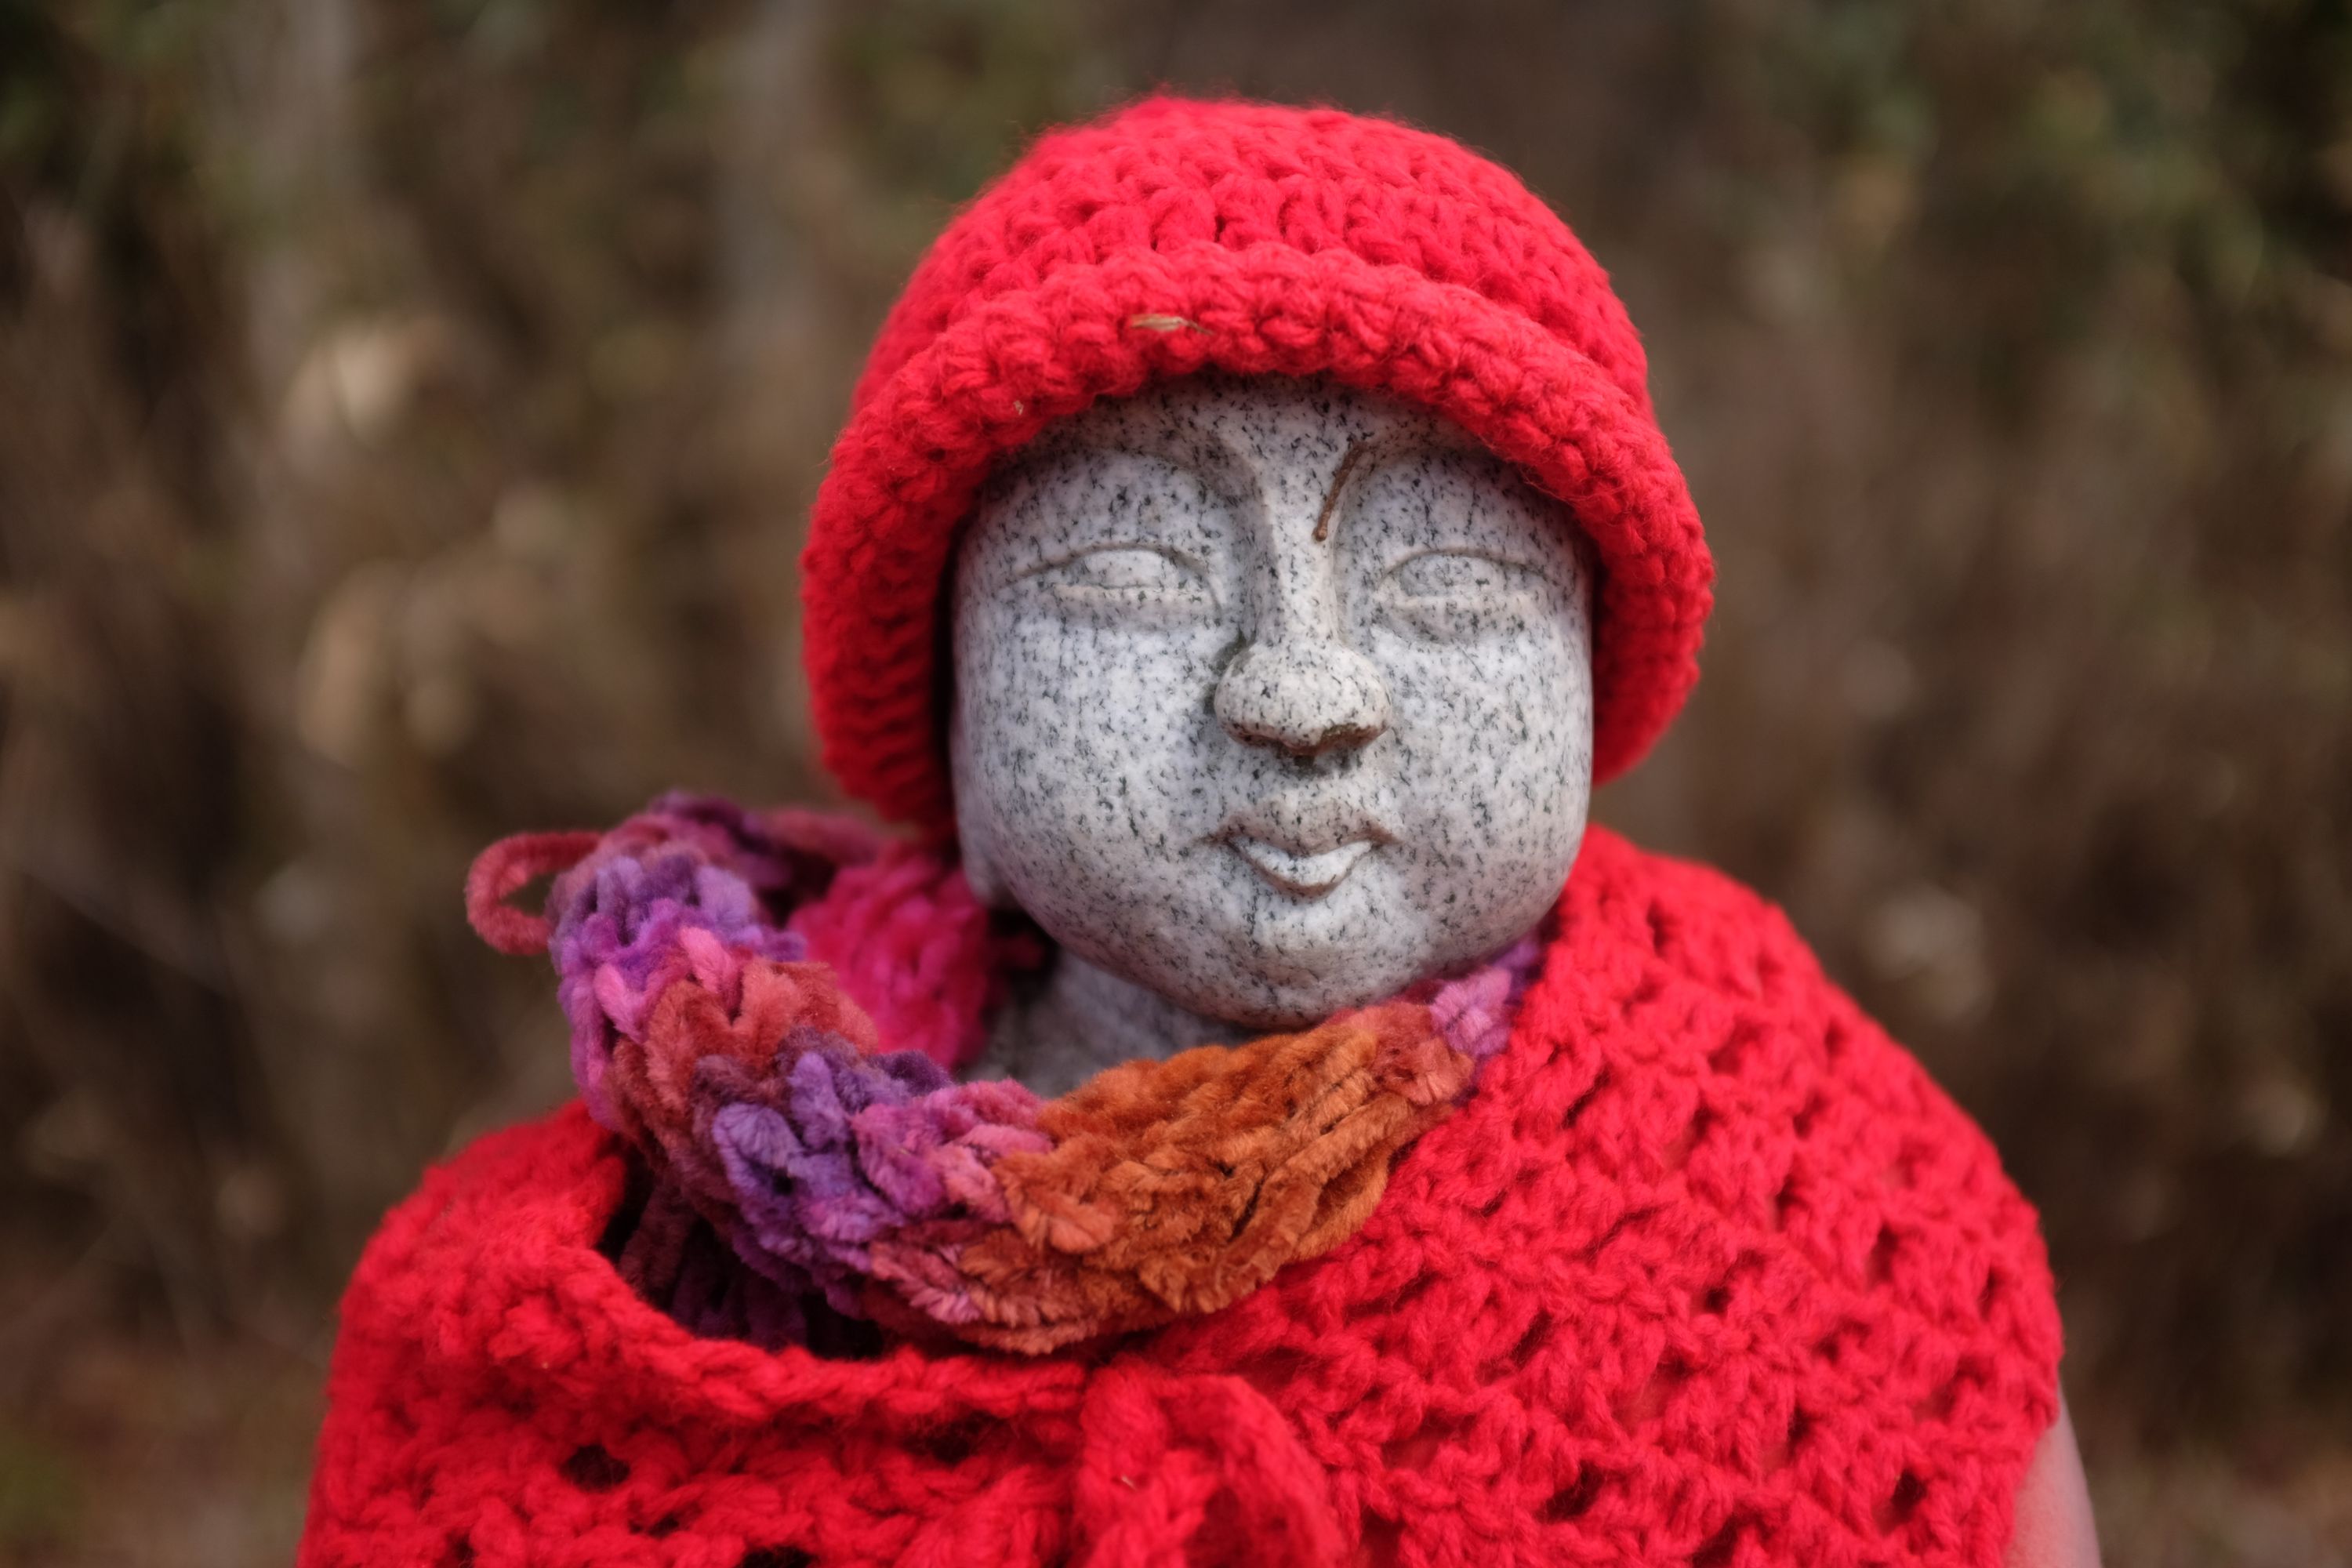 Portrait of the statue, who wears a red knit cap and a red scarf.